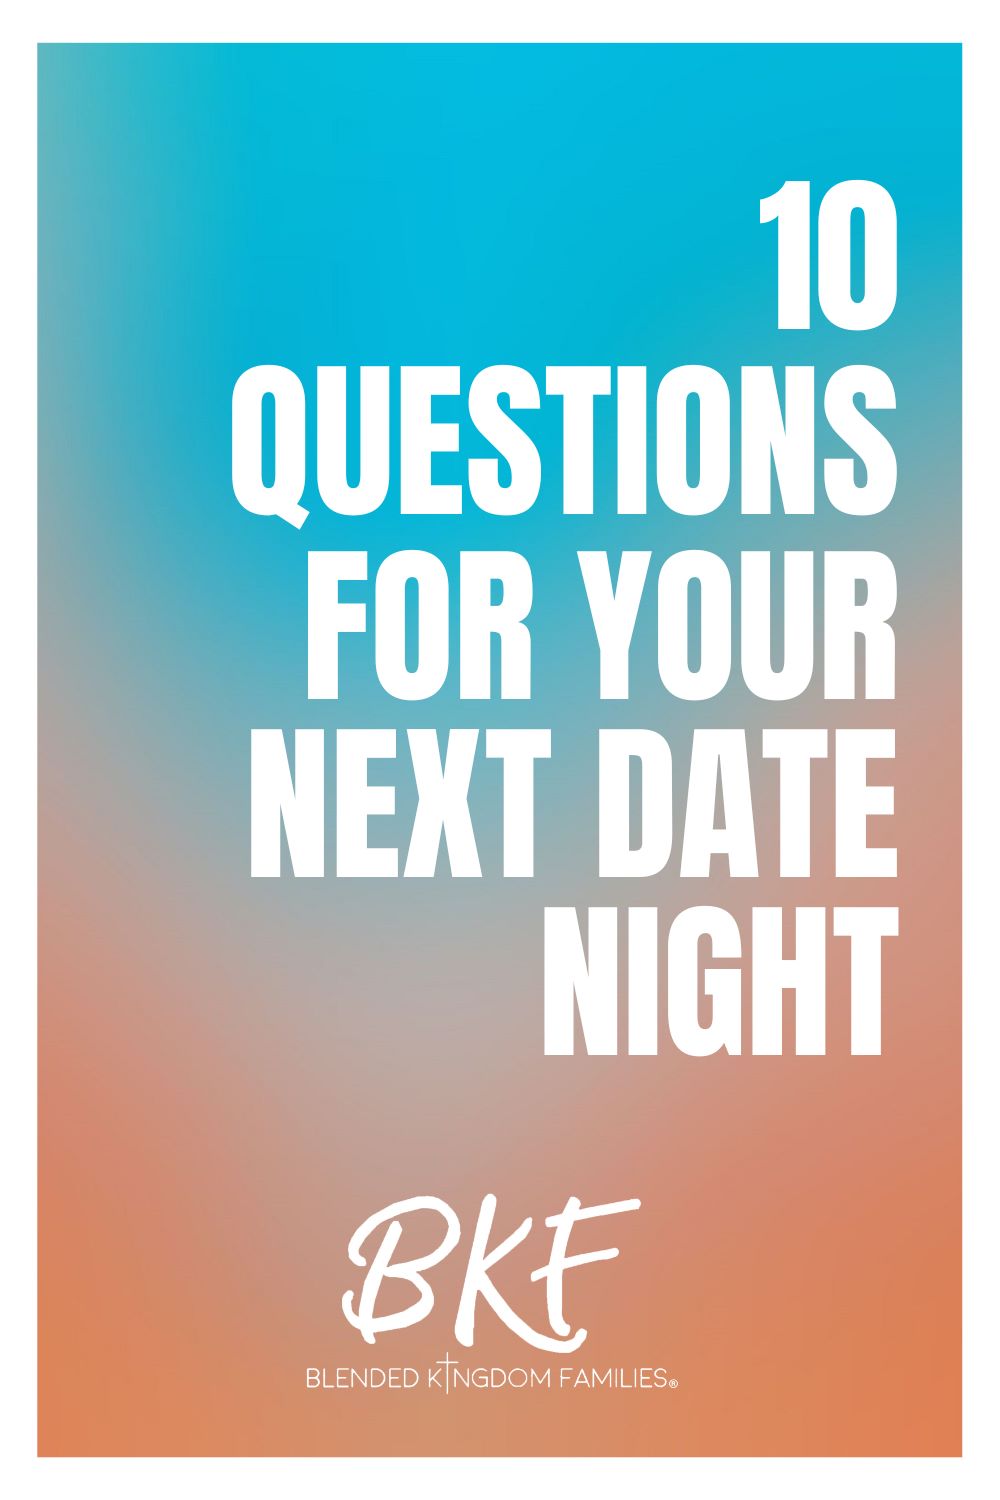 10 Questions for Your Next Date Night